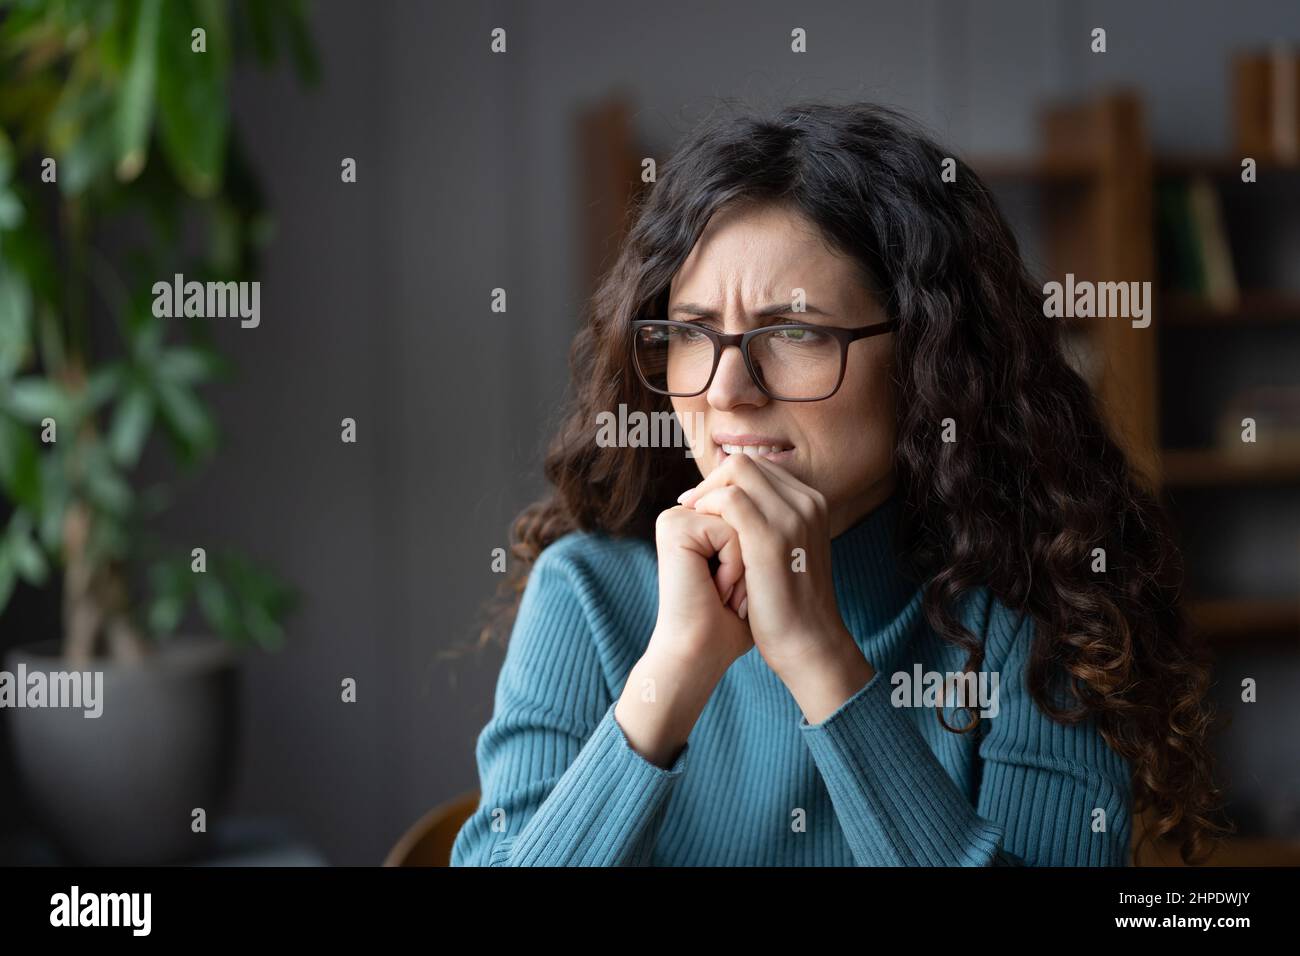 Young nervous stressed female plagued by constant worries and anxious thoughts while sitting at home Stock Photo